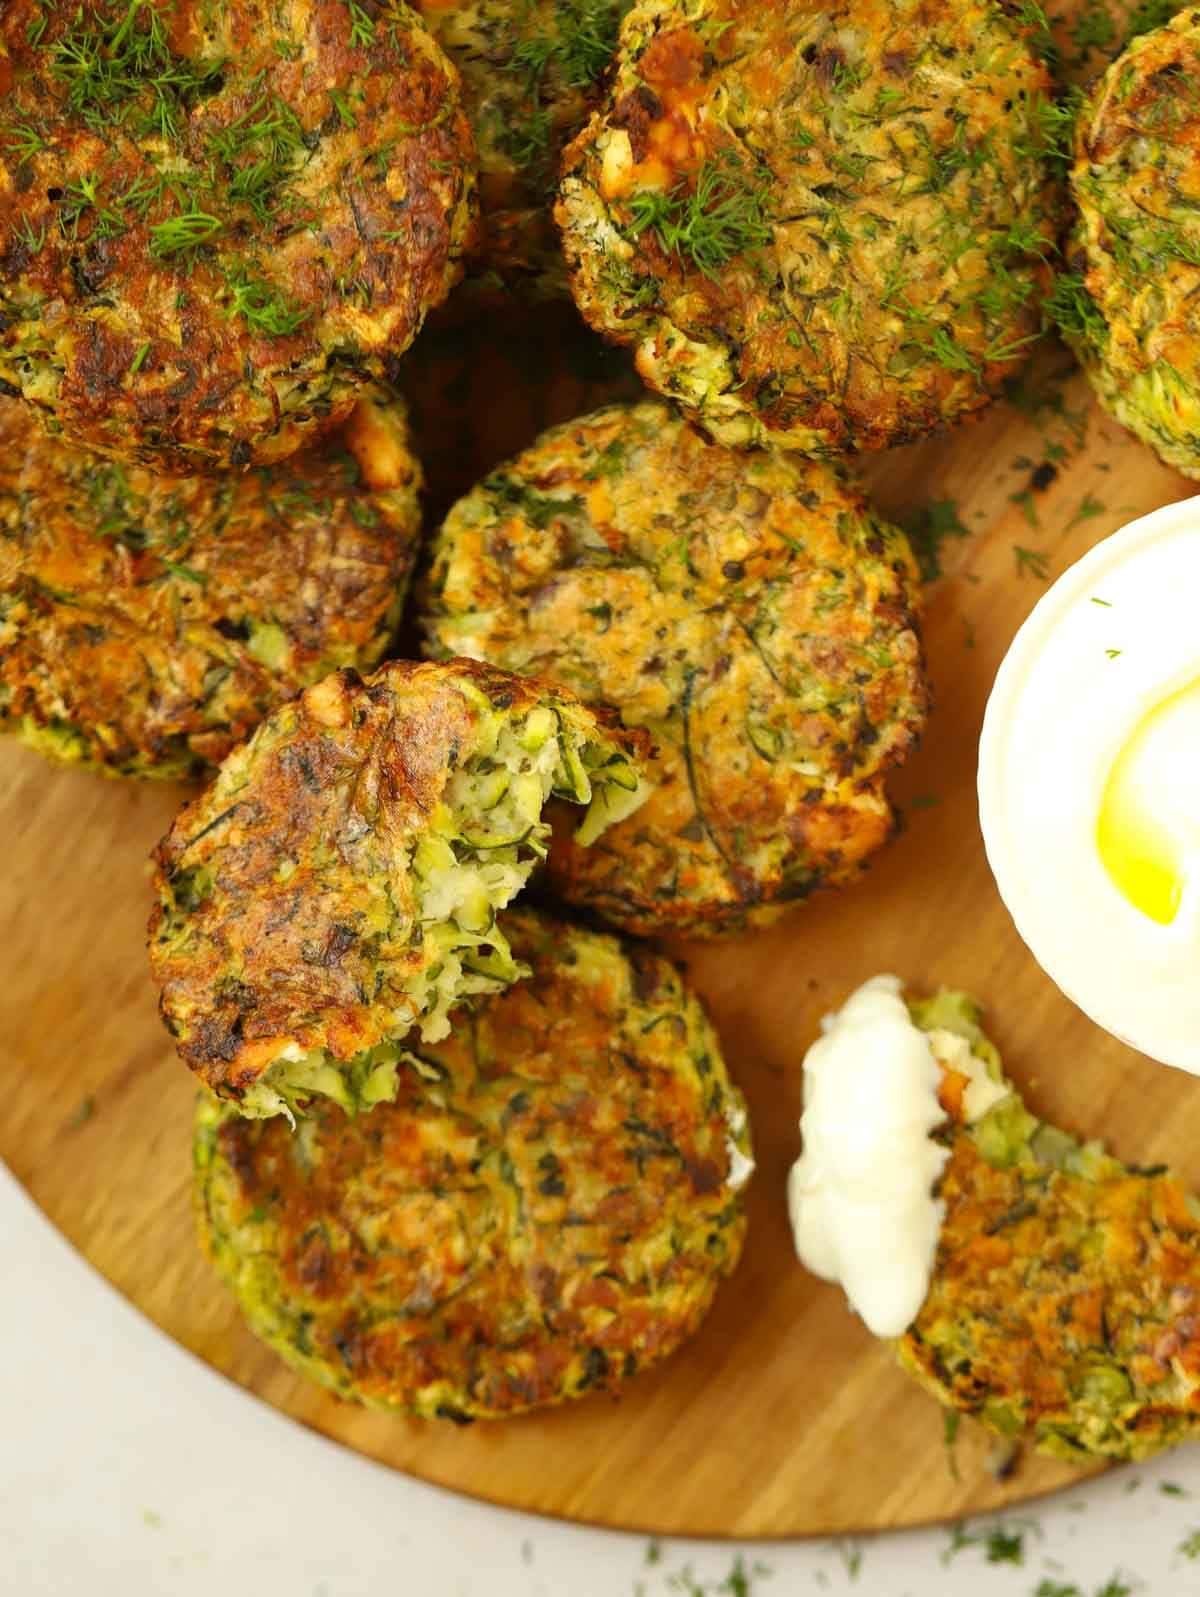 Courgette fritters on a board, with one with a bite missing and another piece dipped in a creamy sauce.